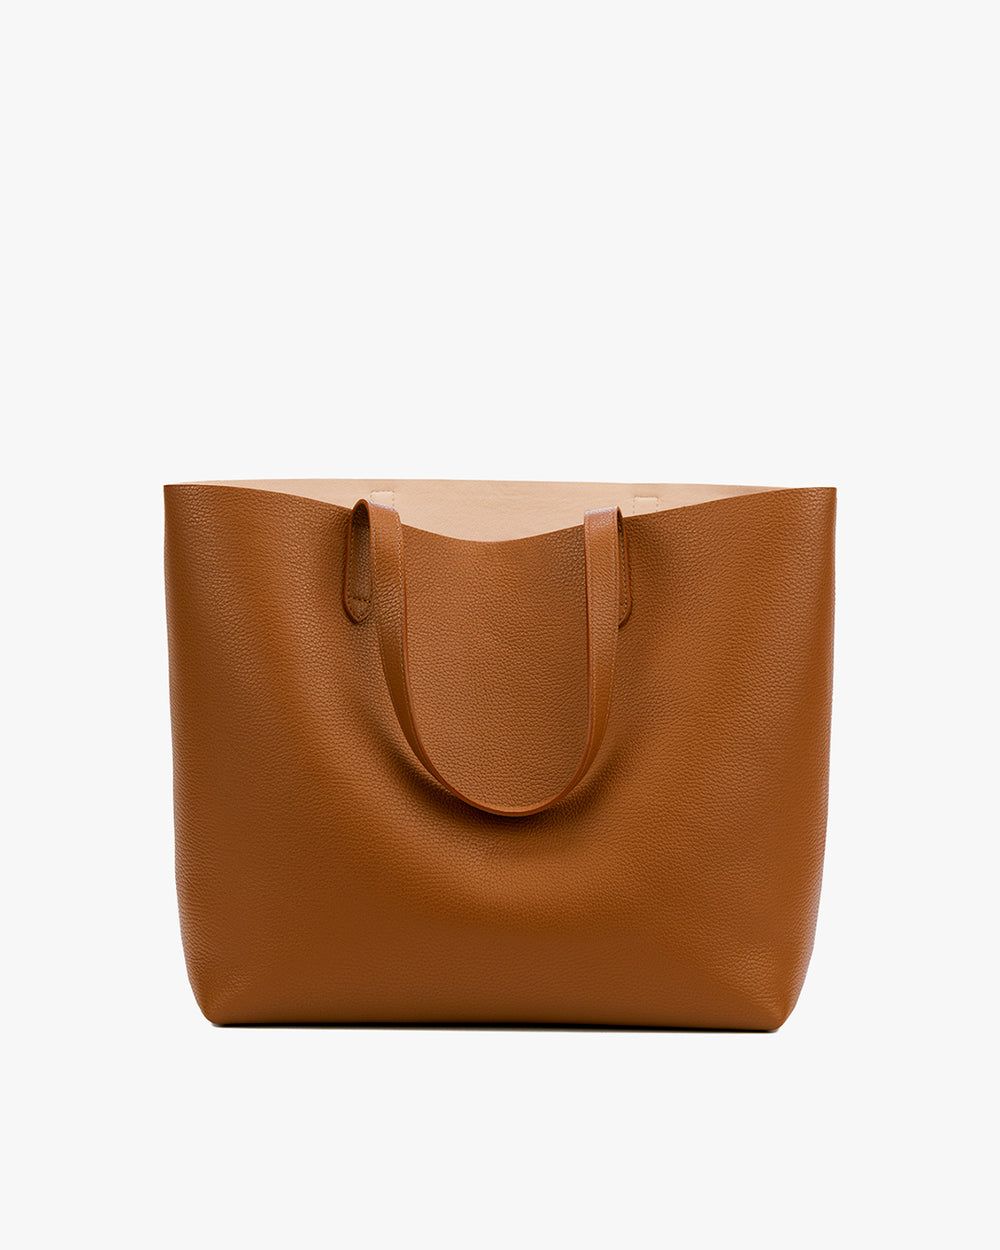 Leather tote bag on a white background.